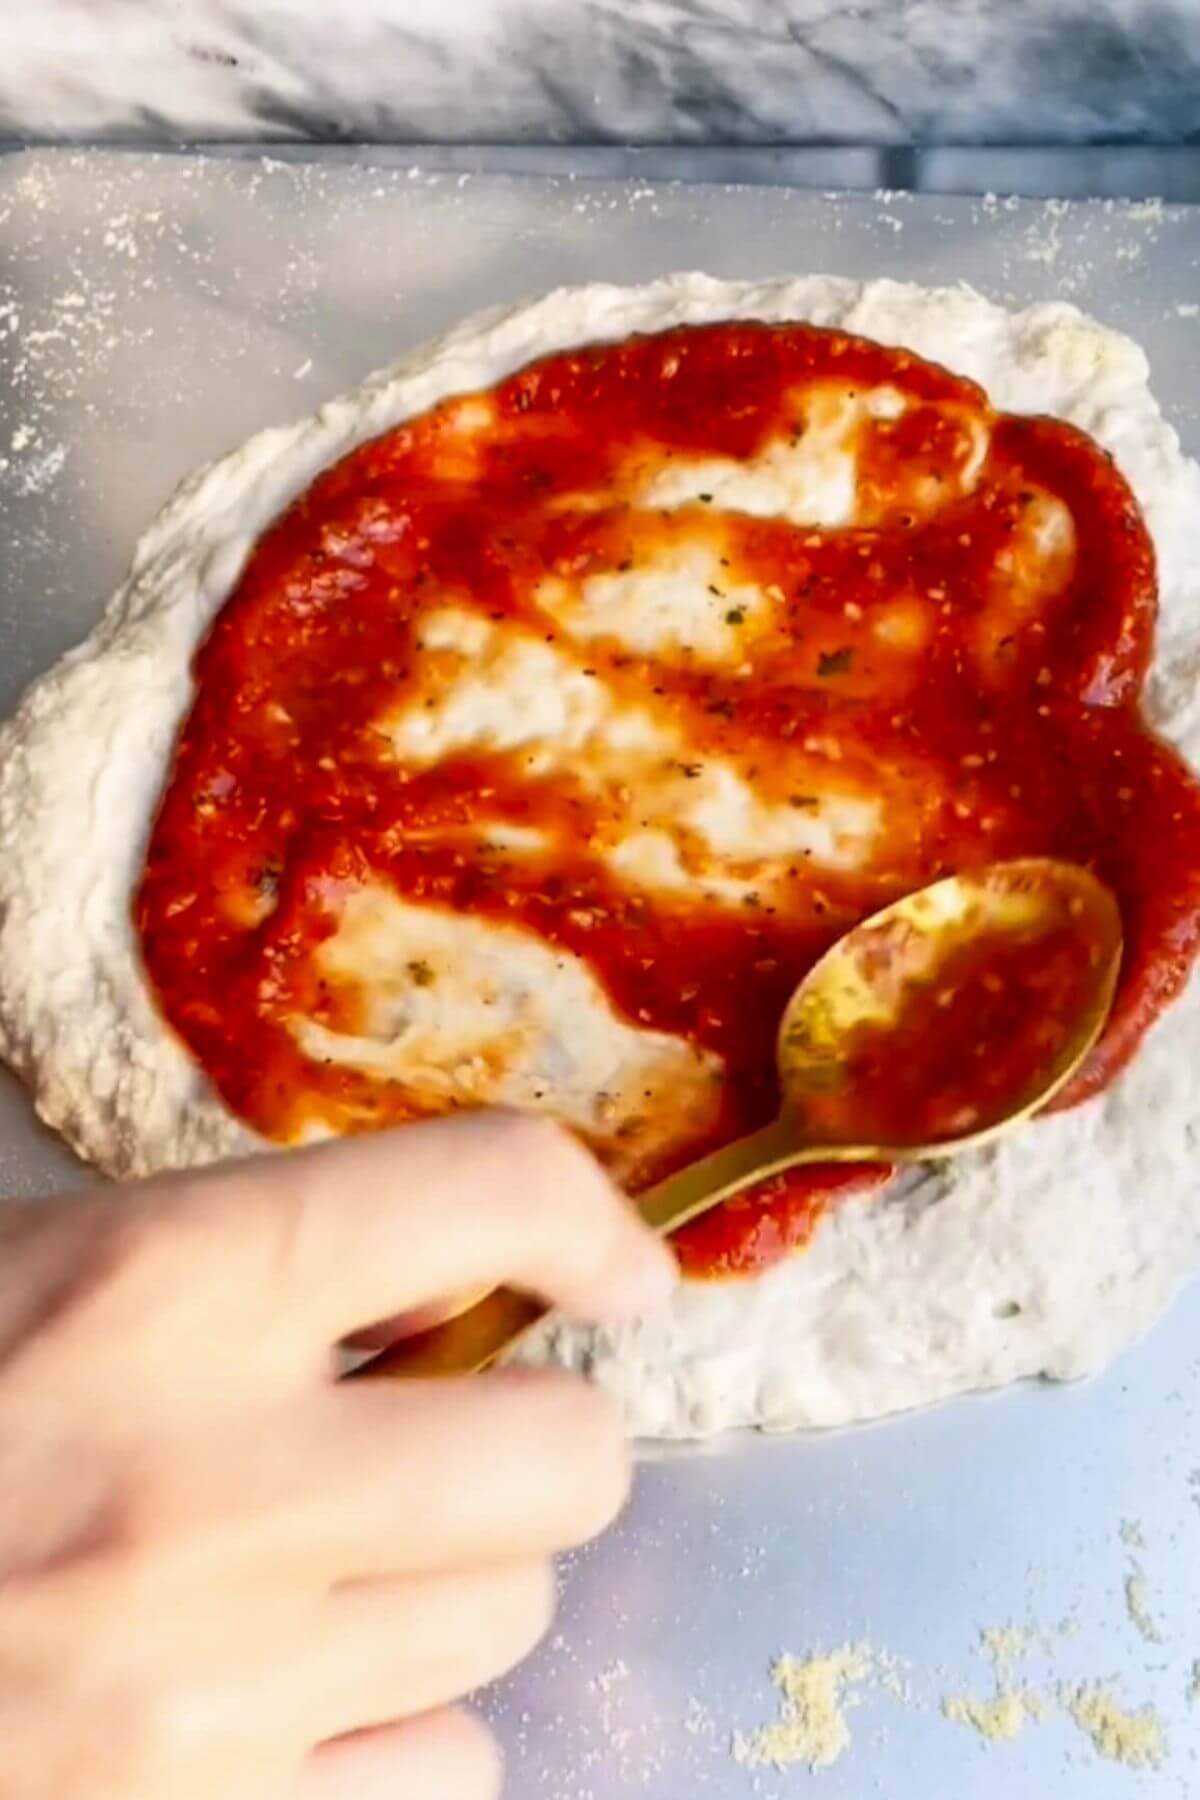 Spooning red pizza sauce onto pizza base.